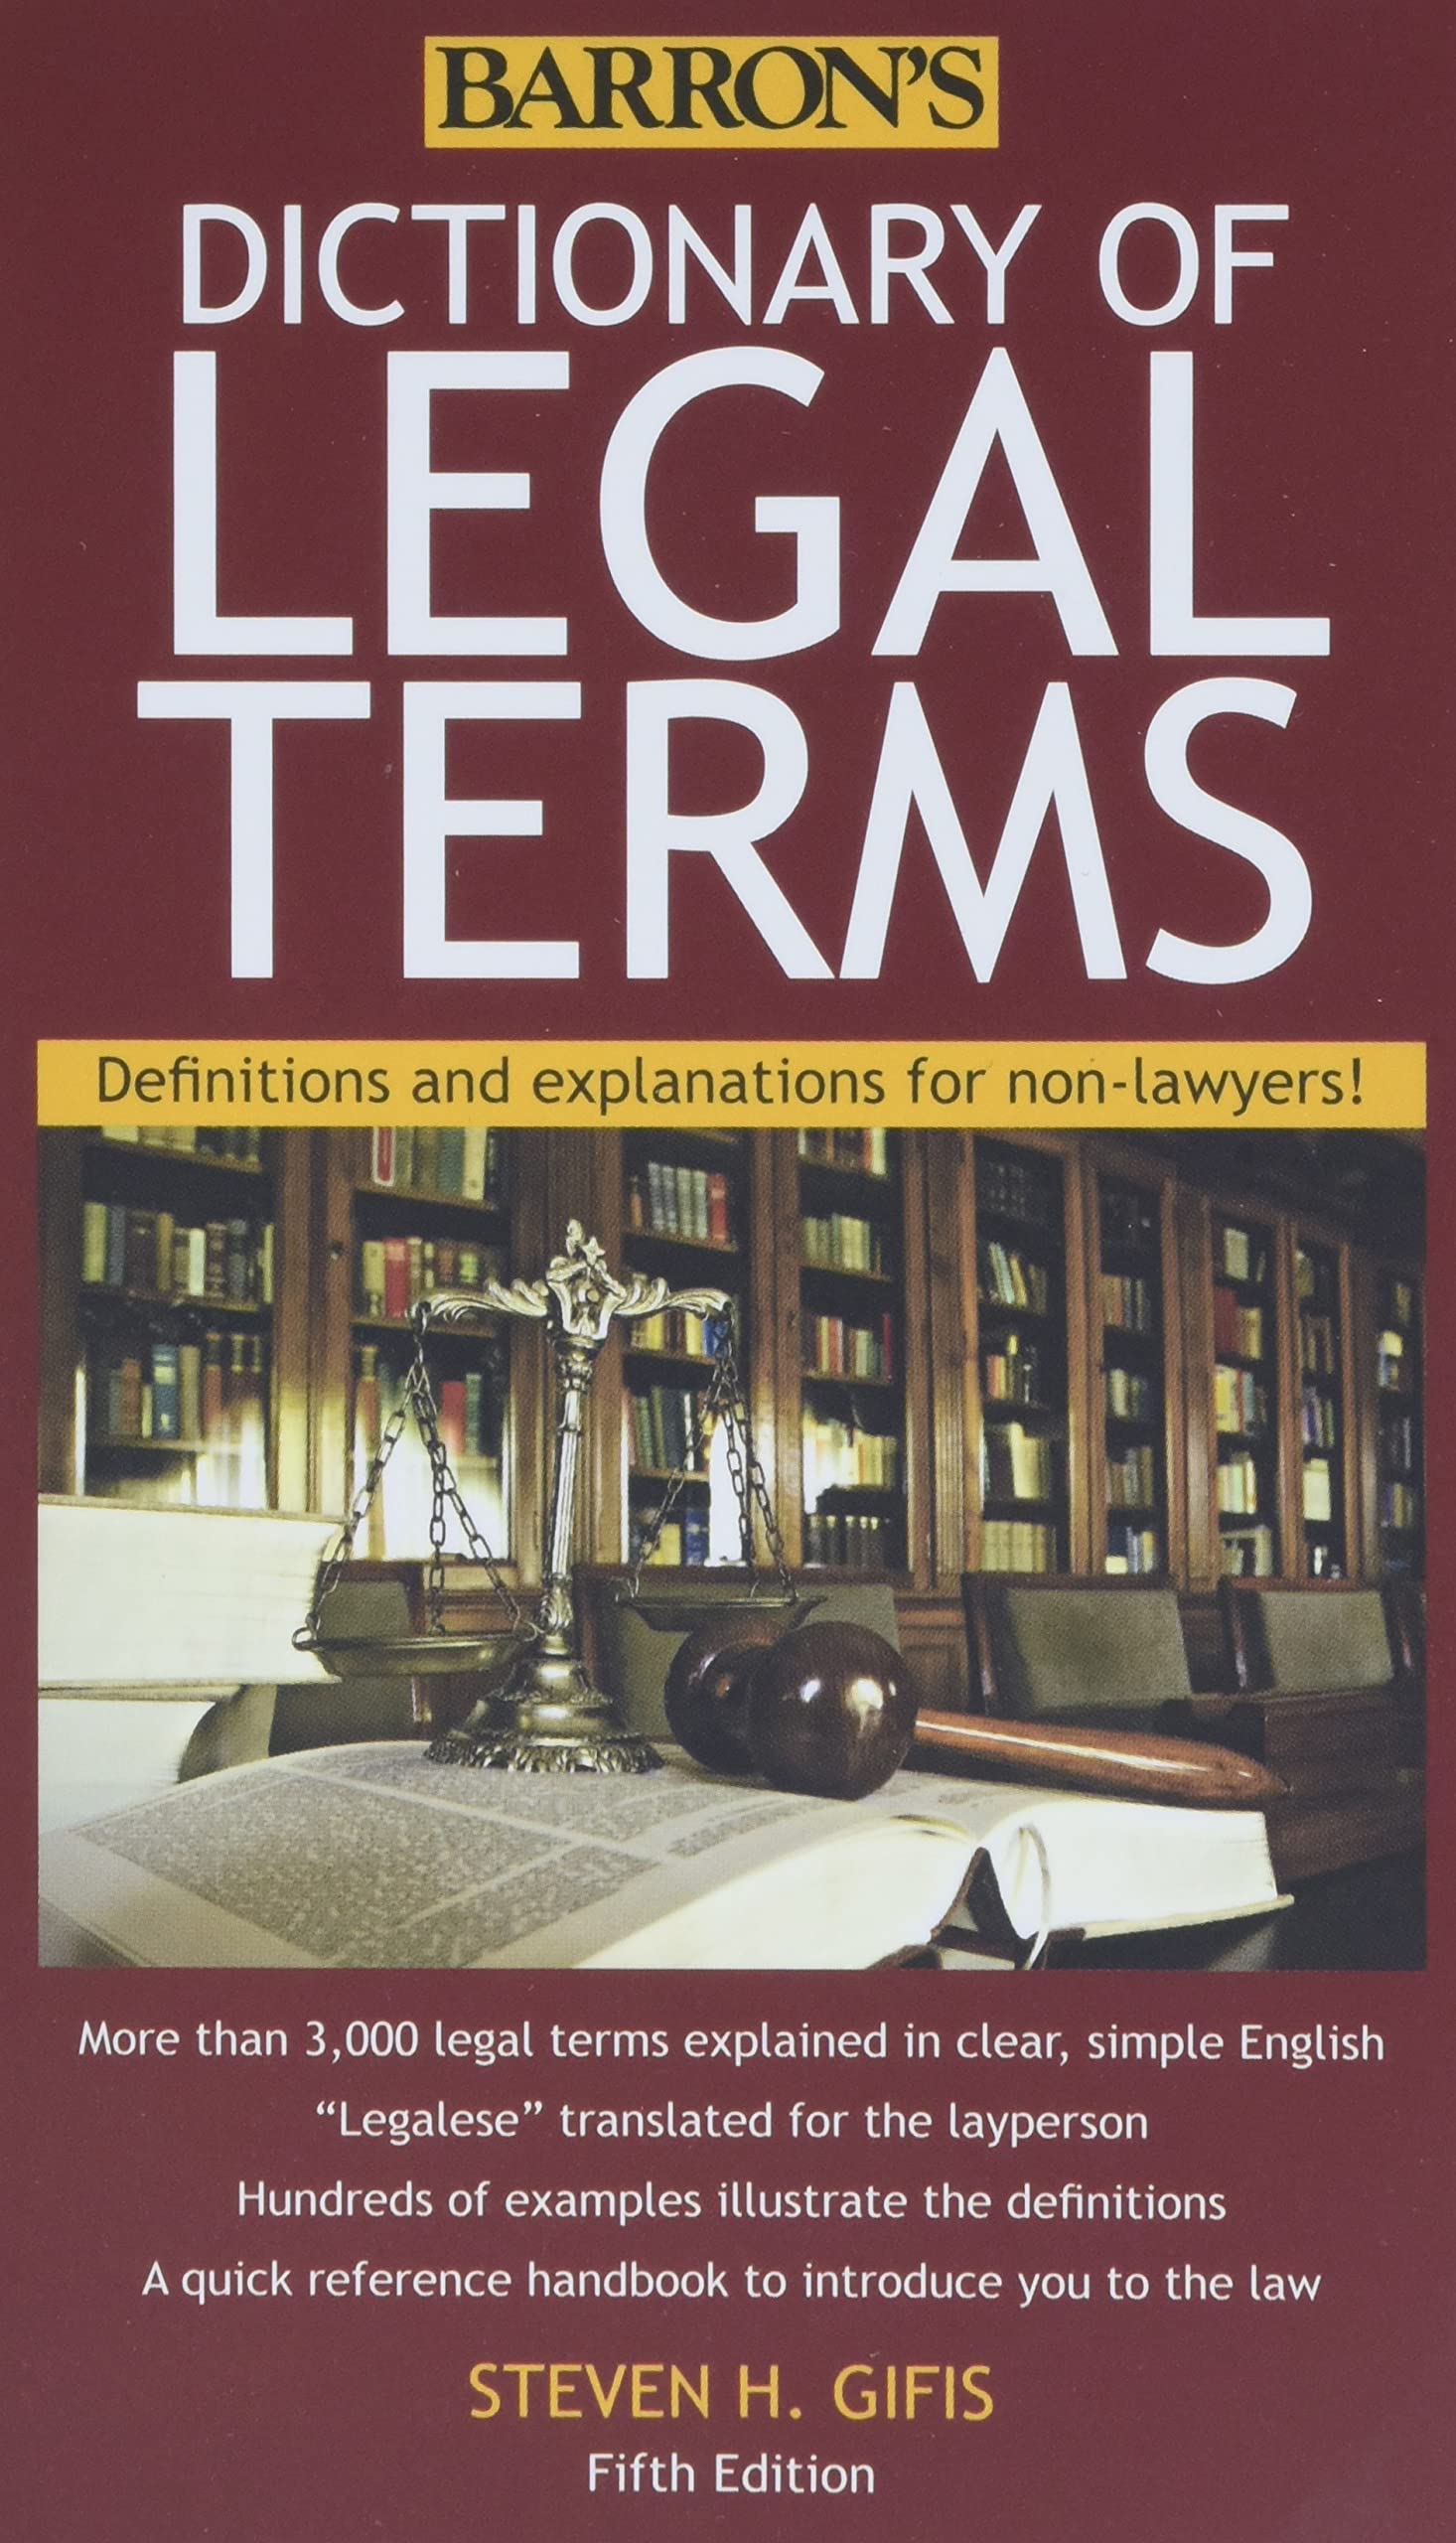 Dictionary of Legal Terms: Definitions and Explanations for Non-Lawyers  - CA Corrections Bookstore